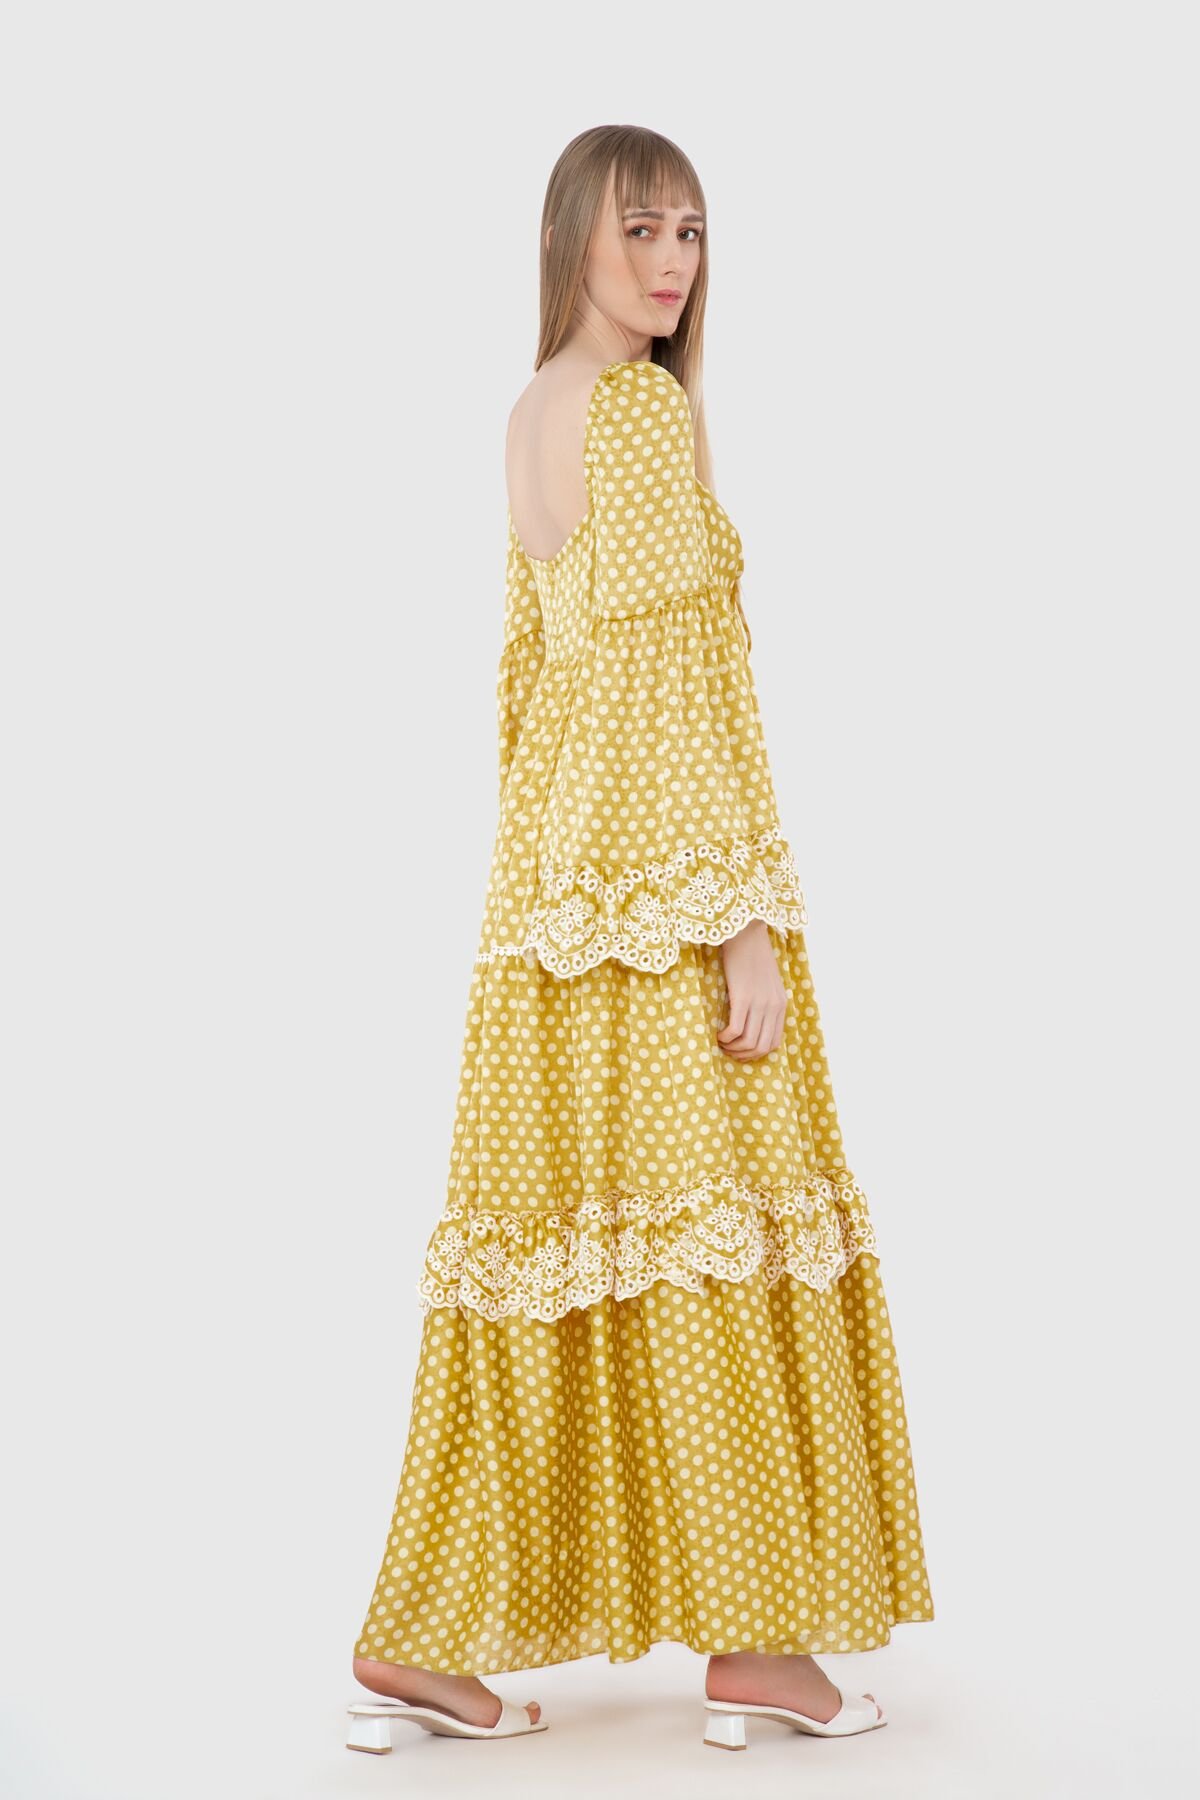 With Polka Dot Embroidery Detail Long Yellow Dress